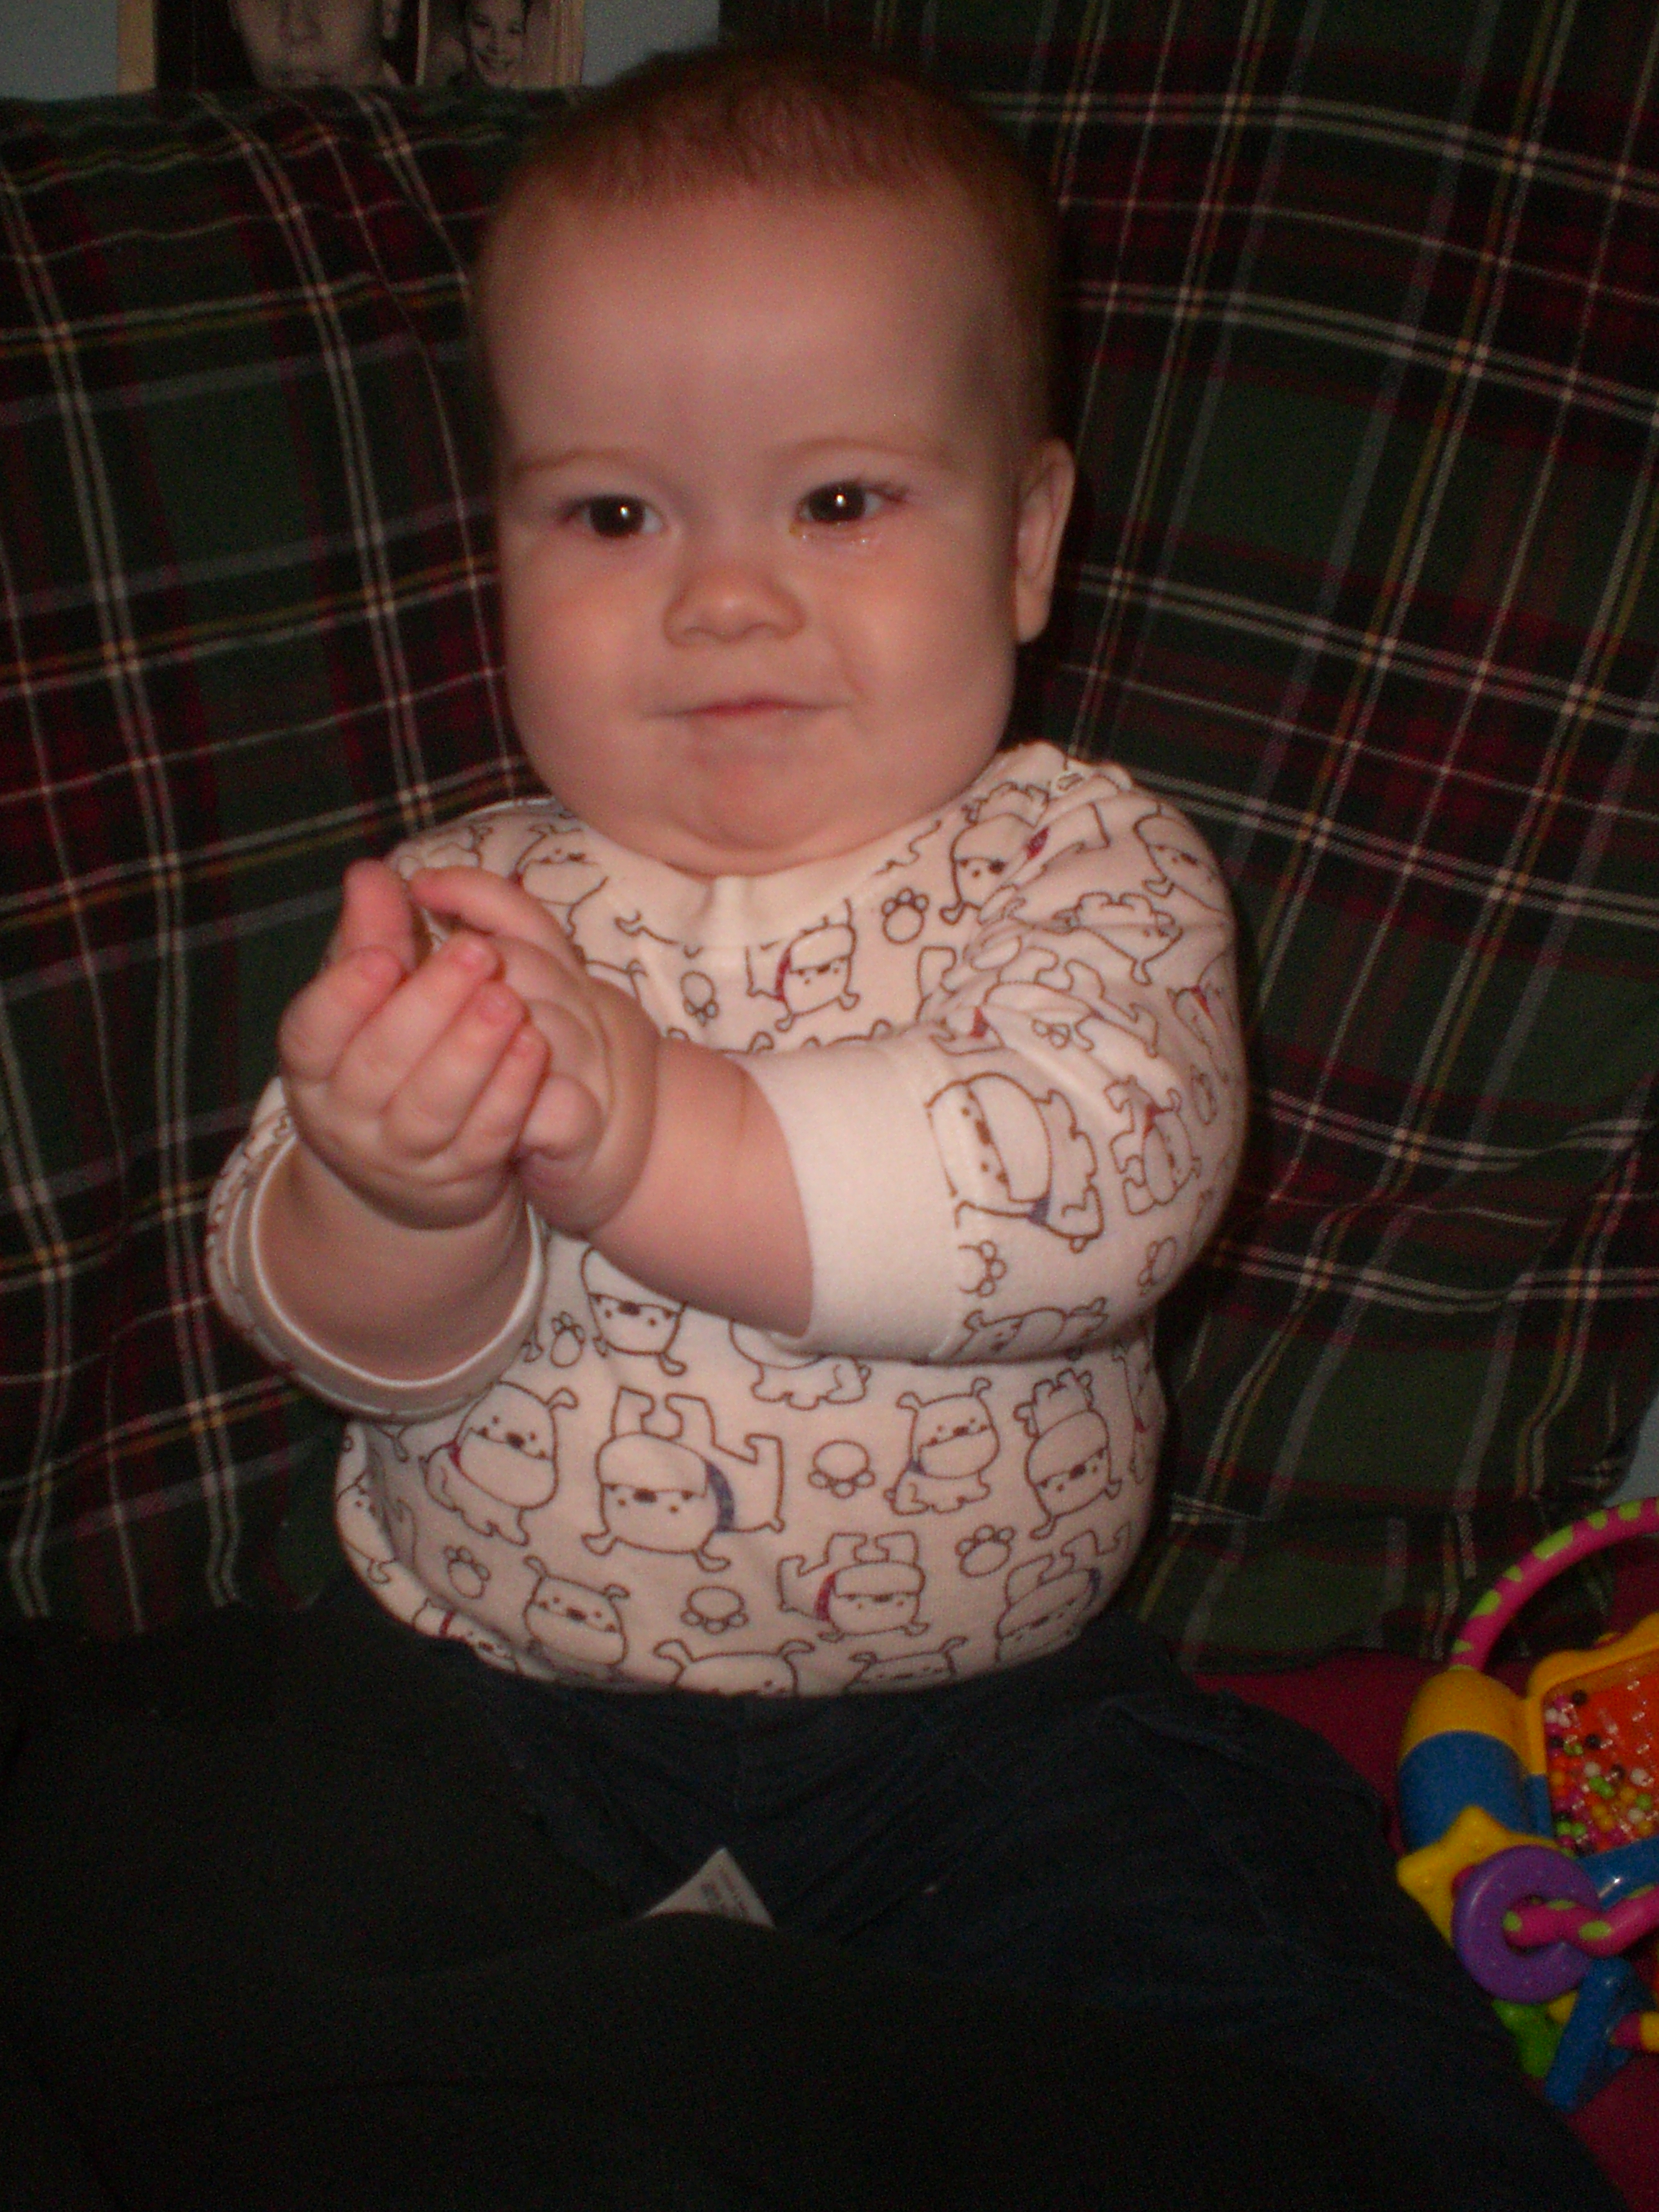 Figuring out how to clap!